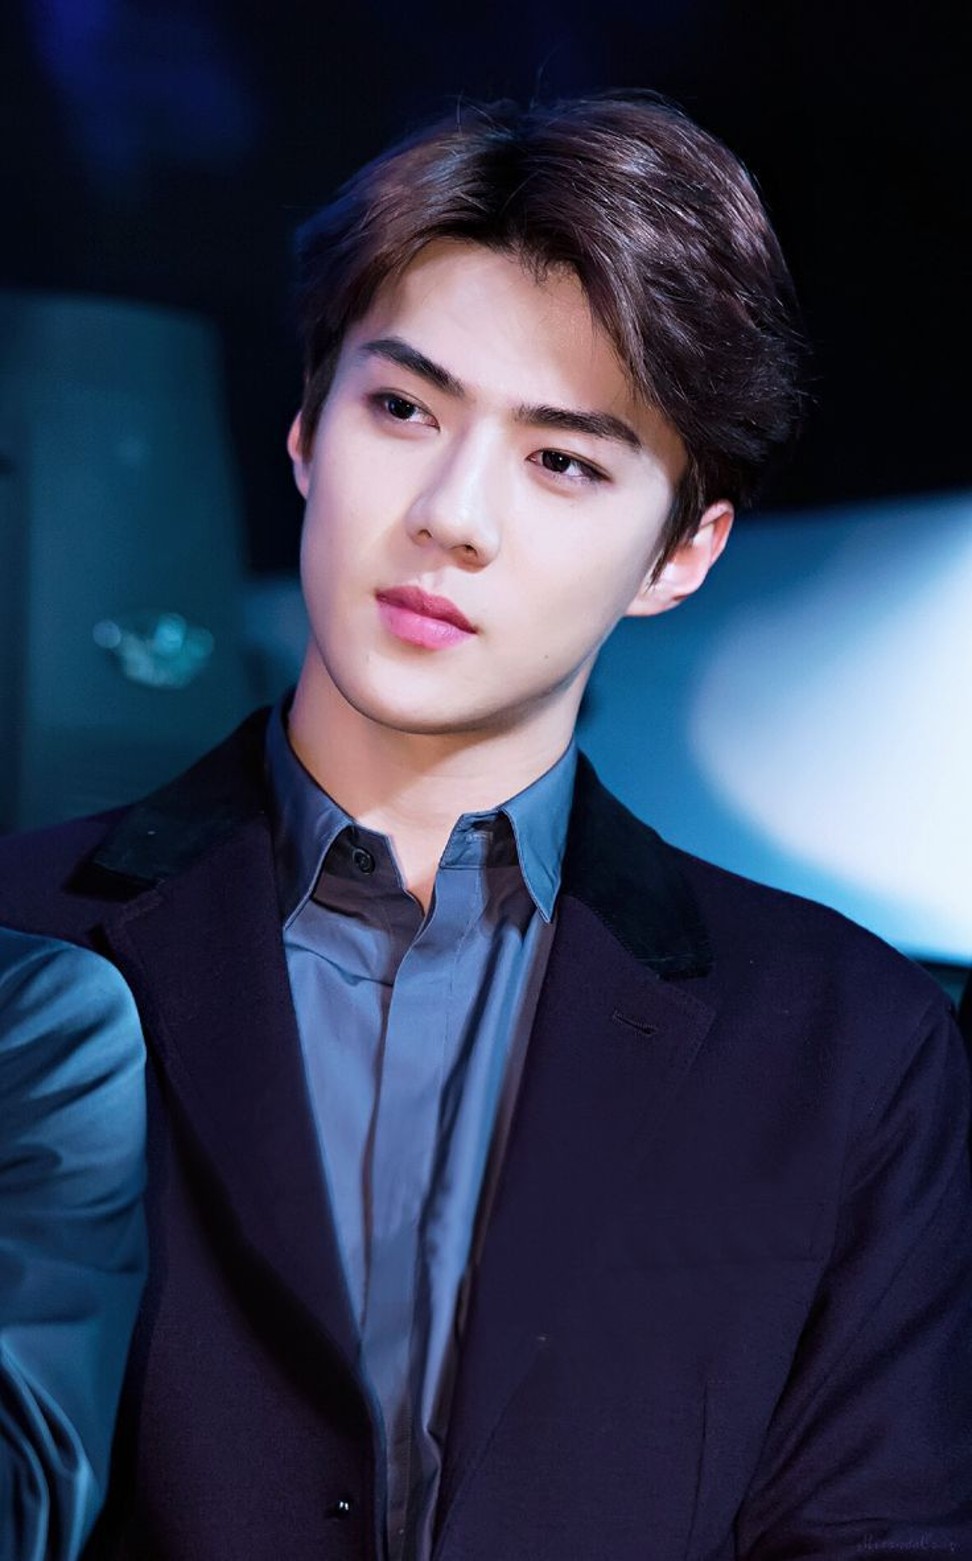 Meet K Pop S Sehun From Exo The Lead Rapper And Dancer And One Of The Most Bankable Faces South China Morning Post